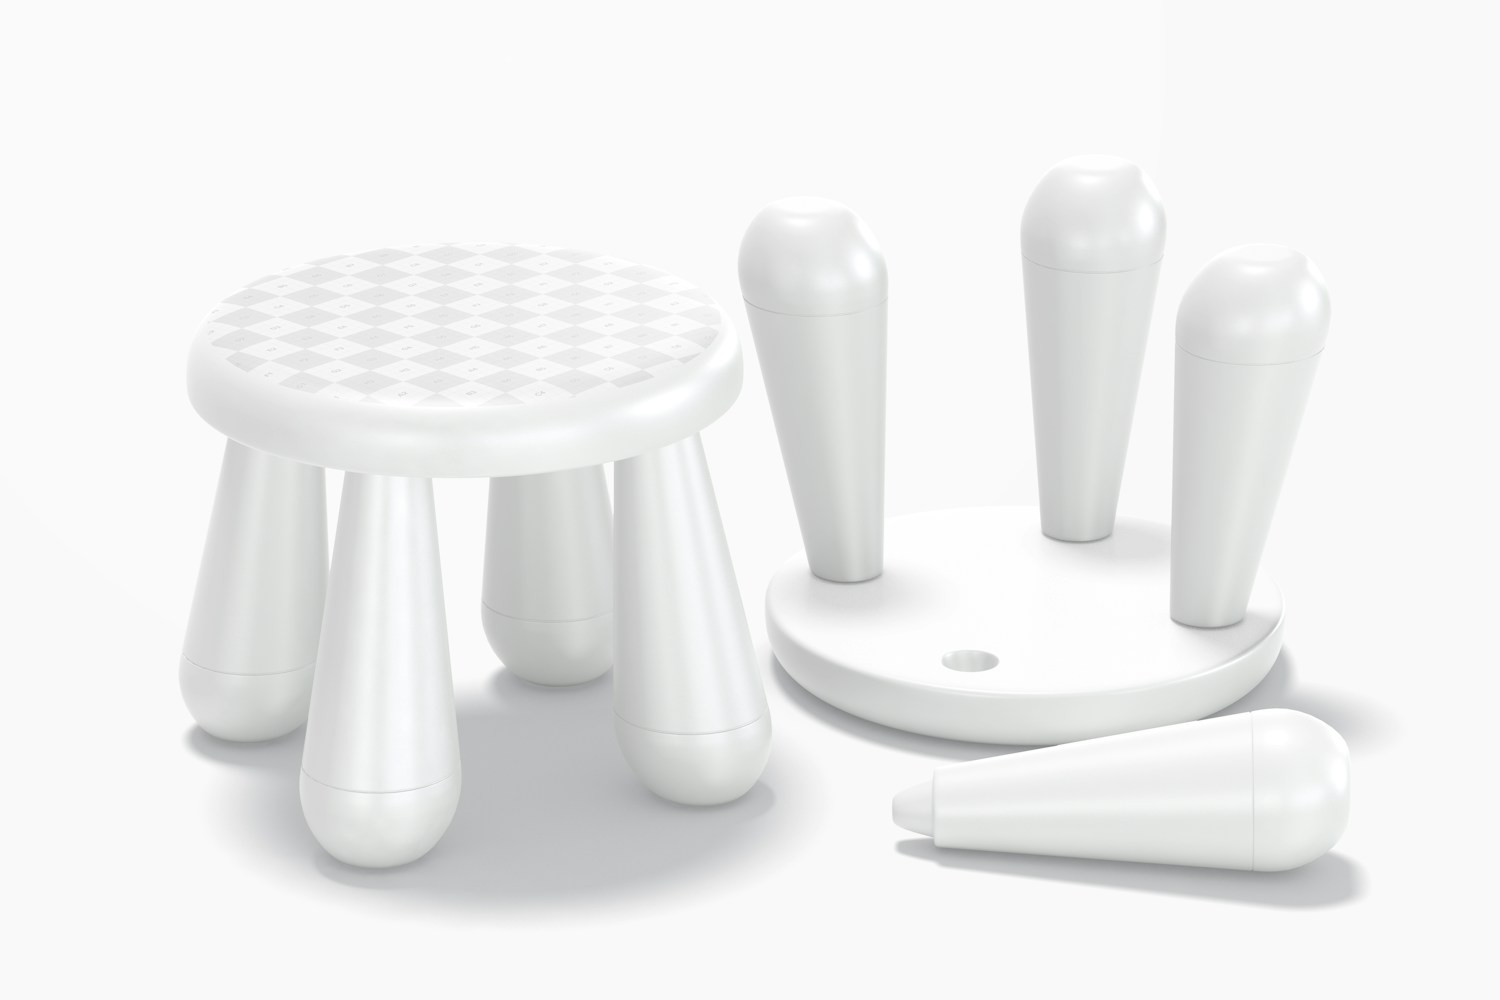 Kids Plastic Stool Mockup, Standing and Dropped 02